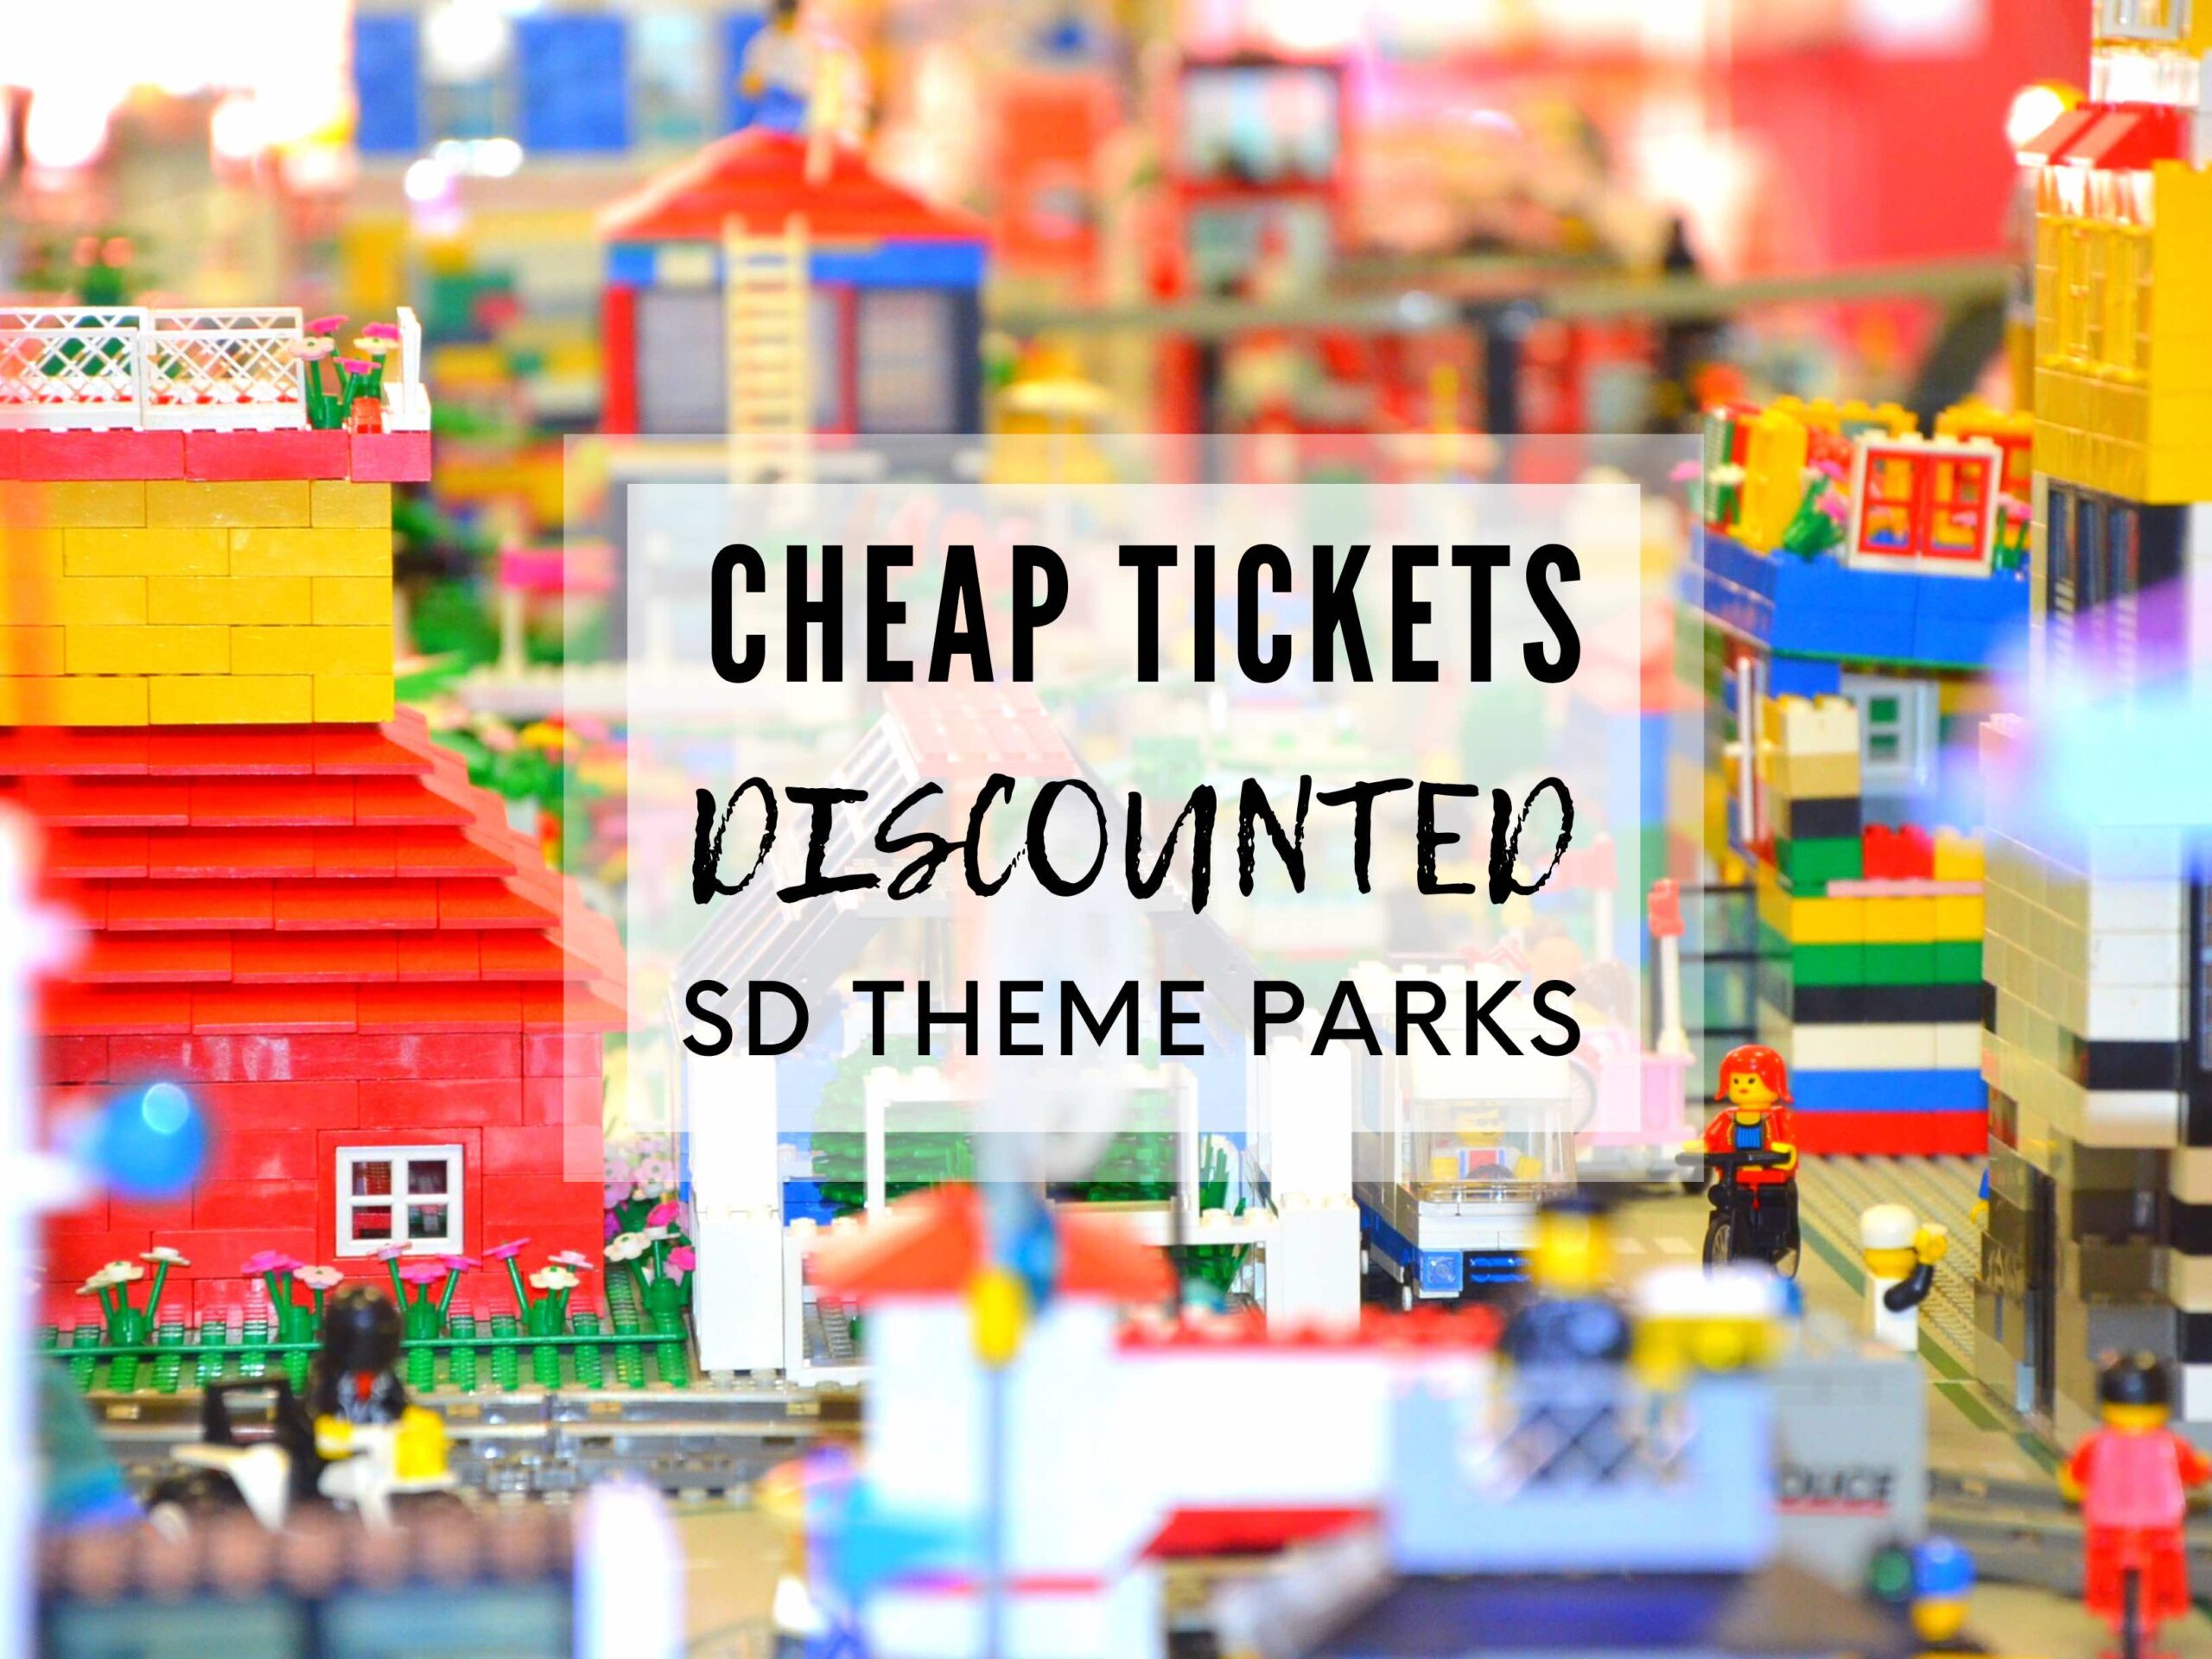 How to get discount tickets for theme parks in California